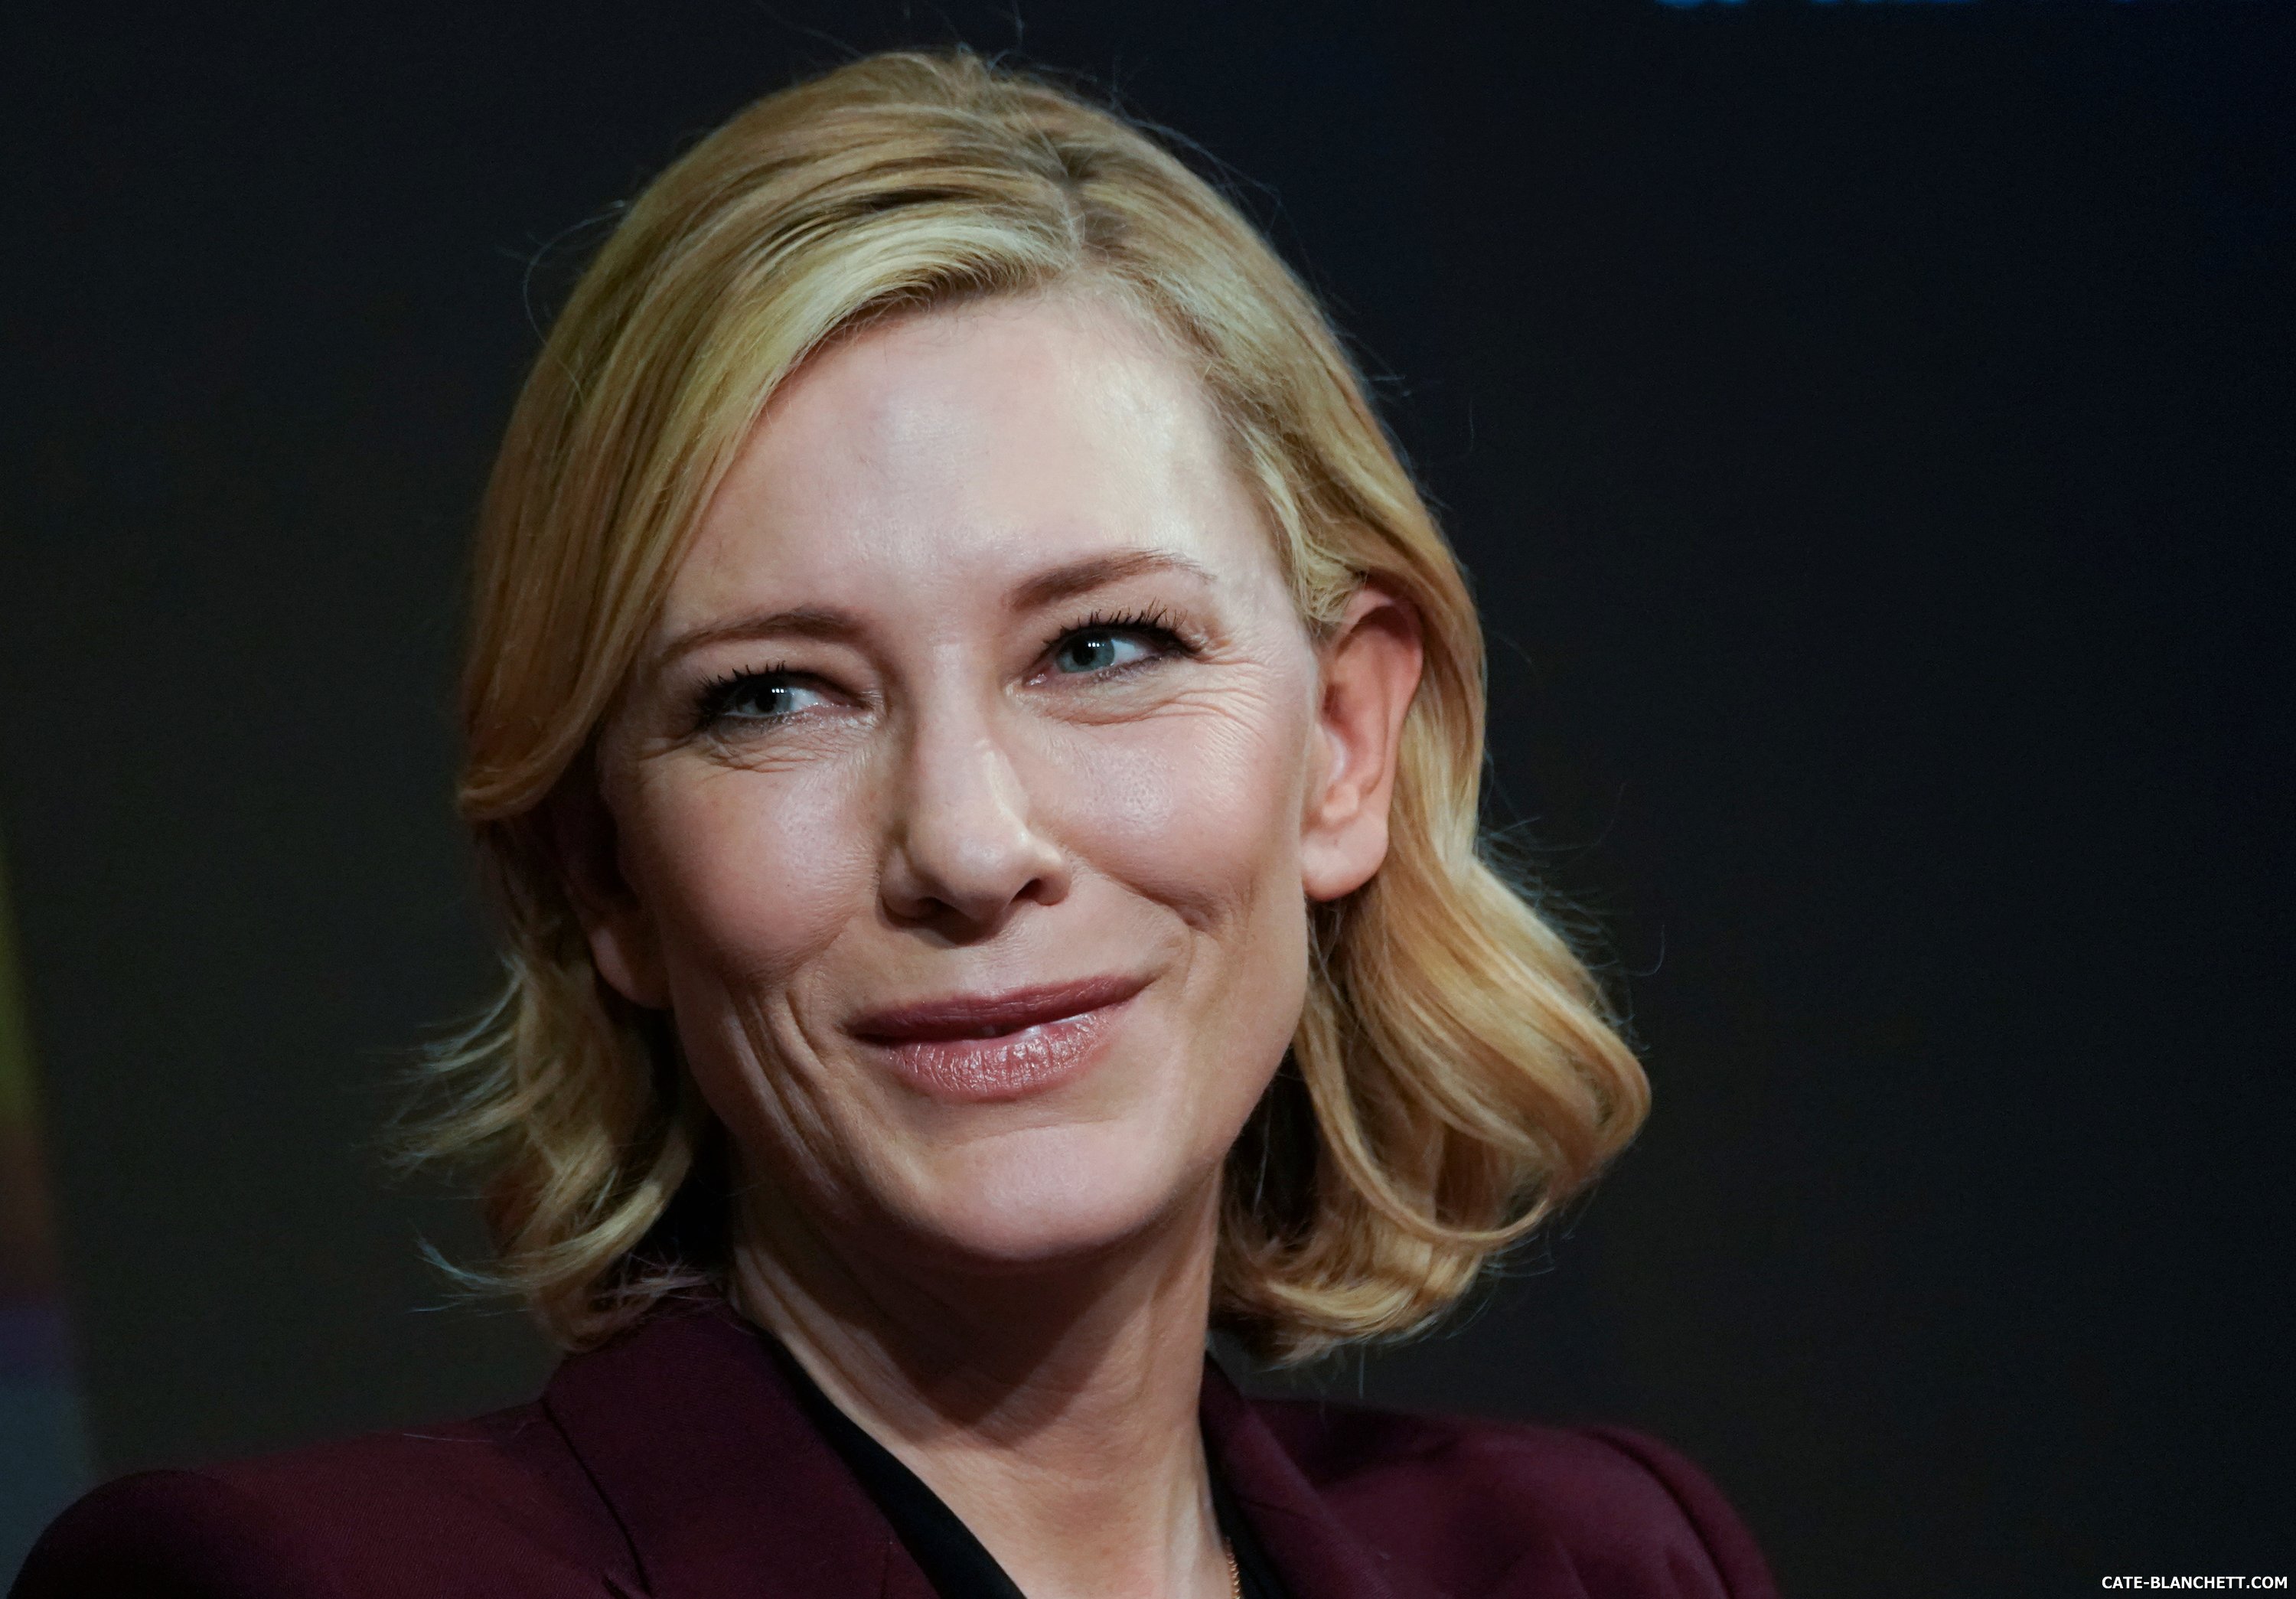 Cate Blanchett at World Economic Forum in Davos – Additional Photos